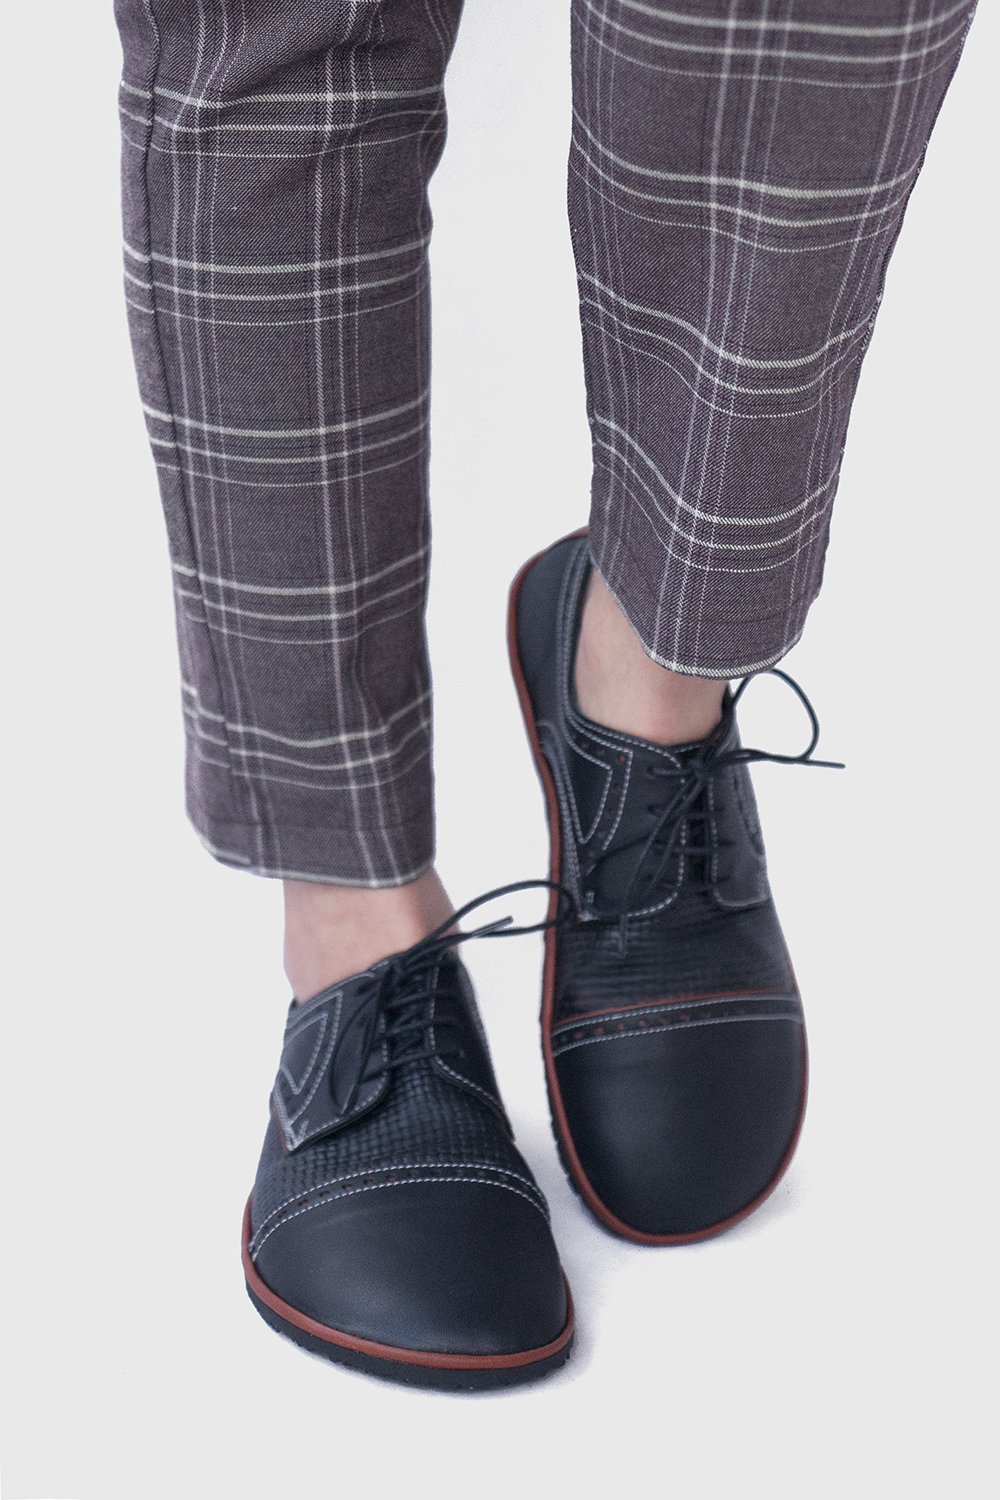 Image of Toecap Brogued Derby in Black and Brown - Ready to ship